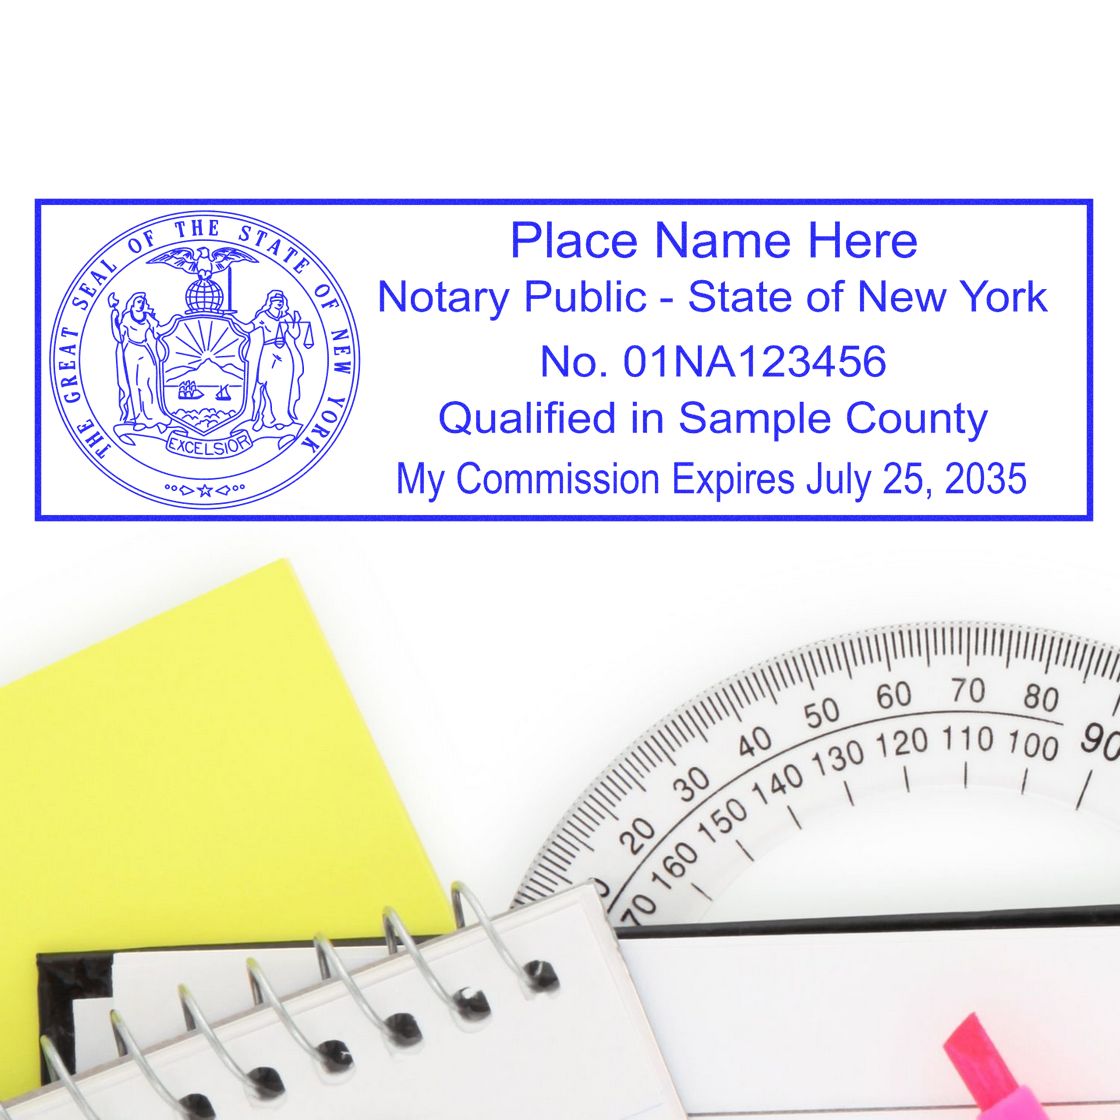 Slim Pre-Inked State Seal Notary Stamp for New York in use photo showing a stamped imprint of the Slim Pre-Inked State Seal Notary Stamp for New York